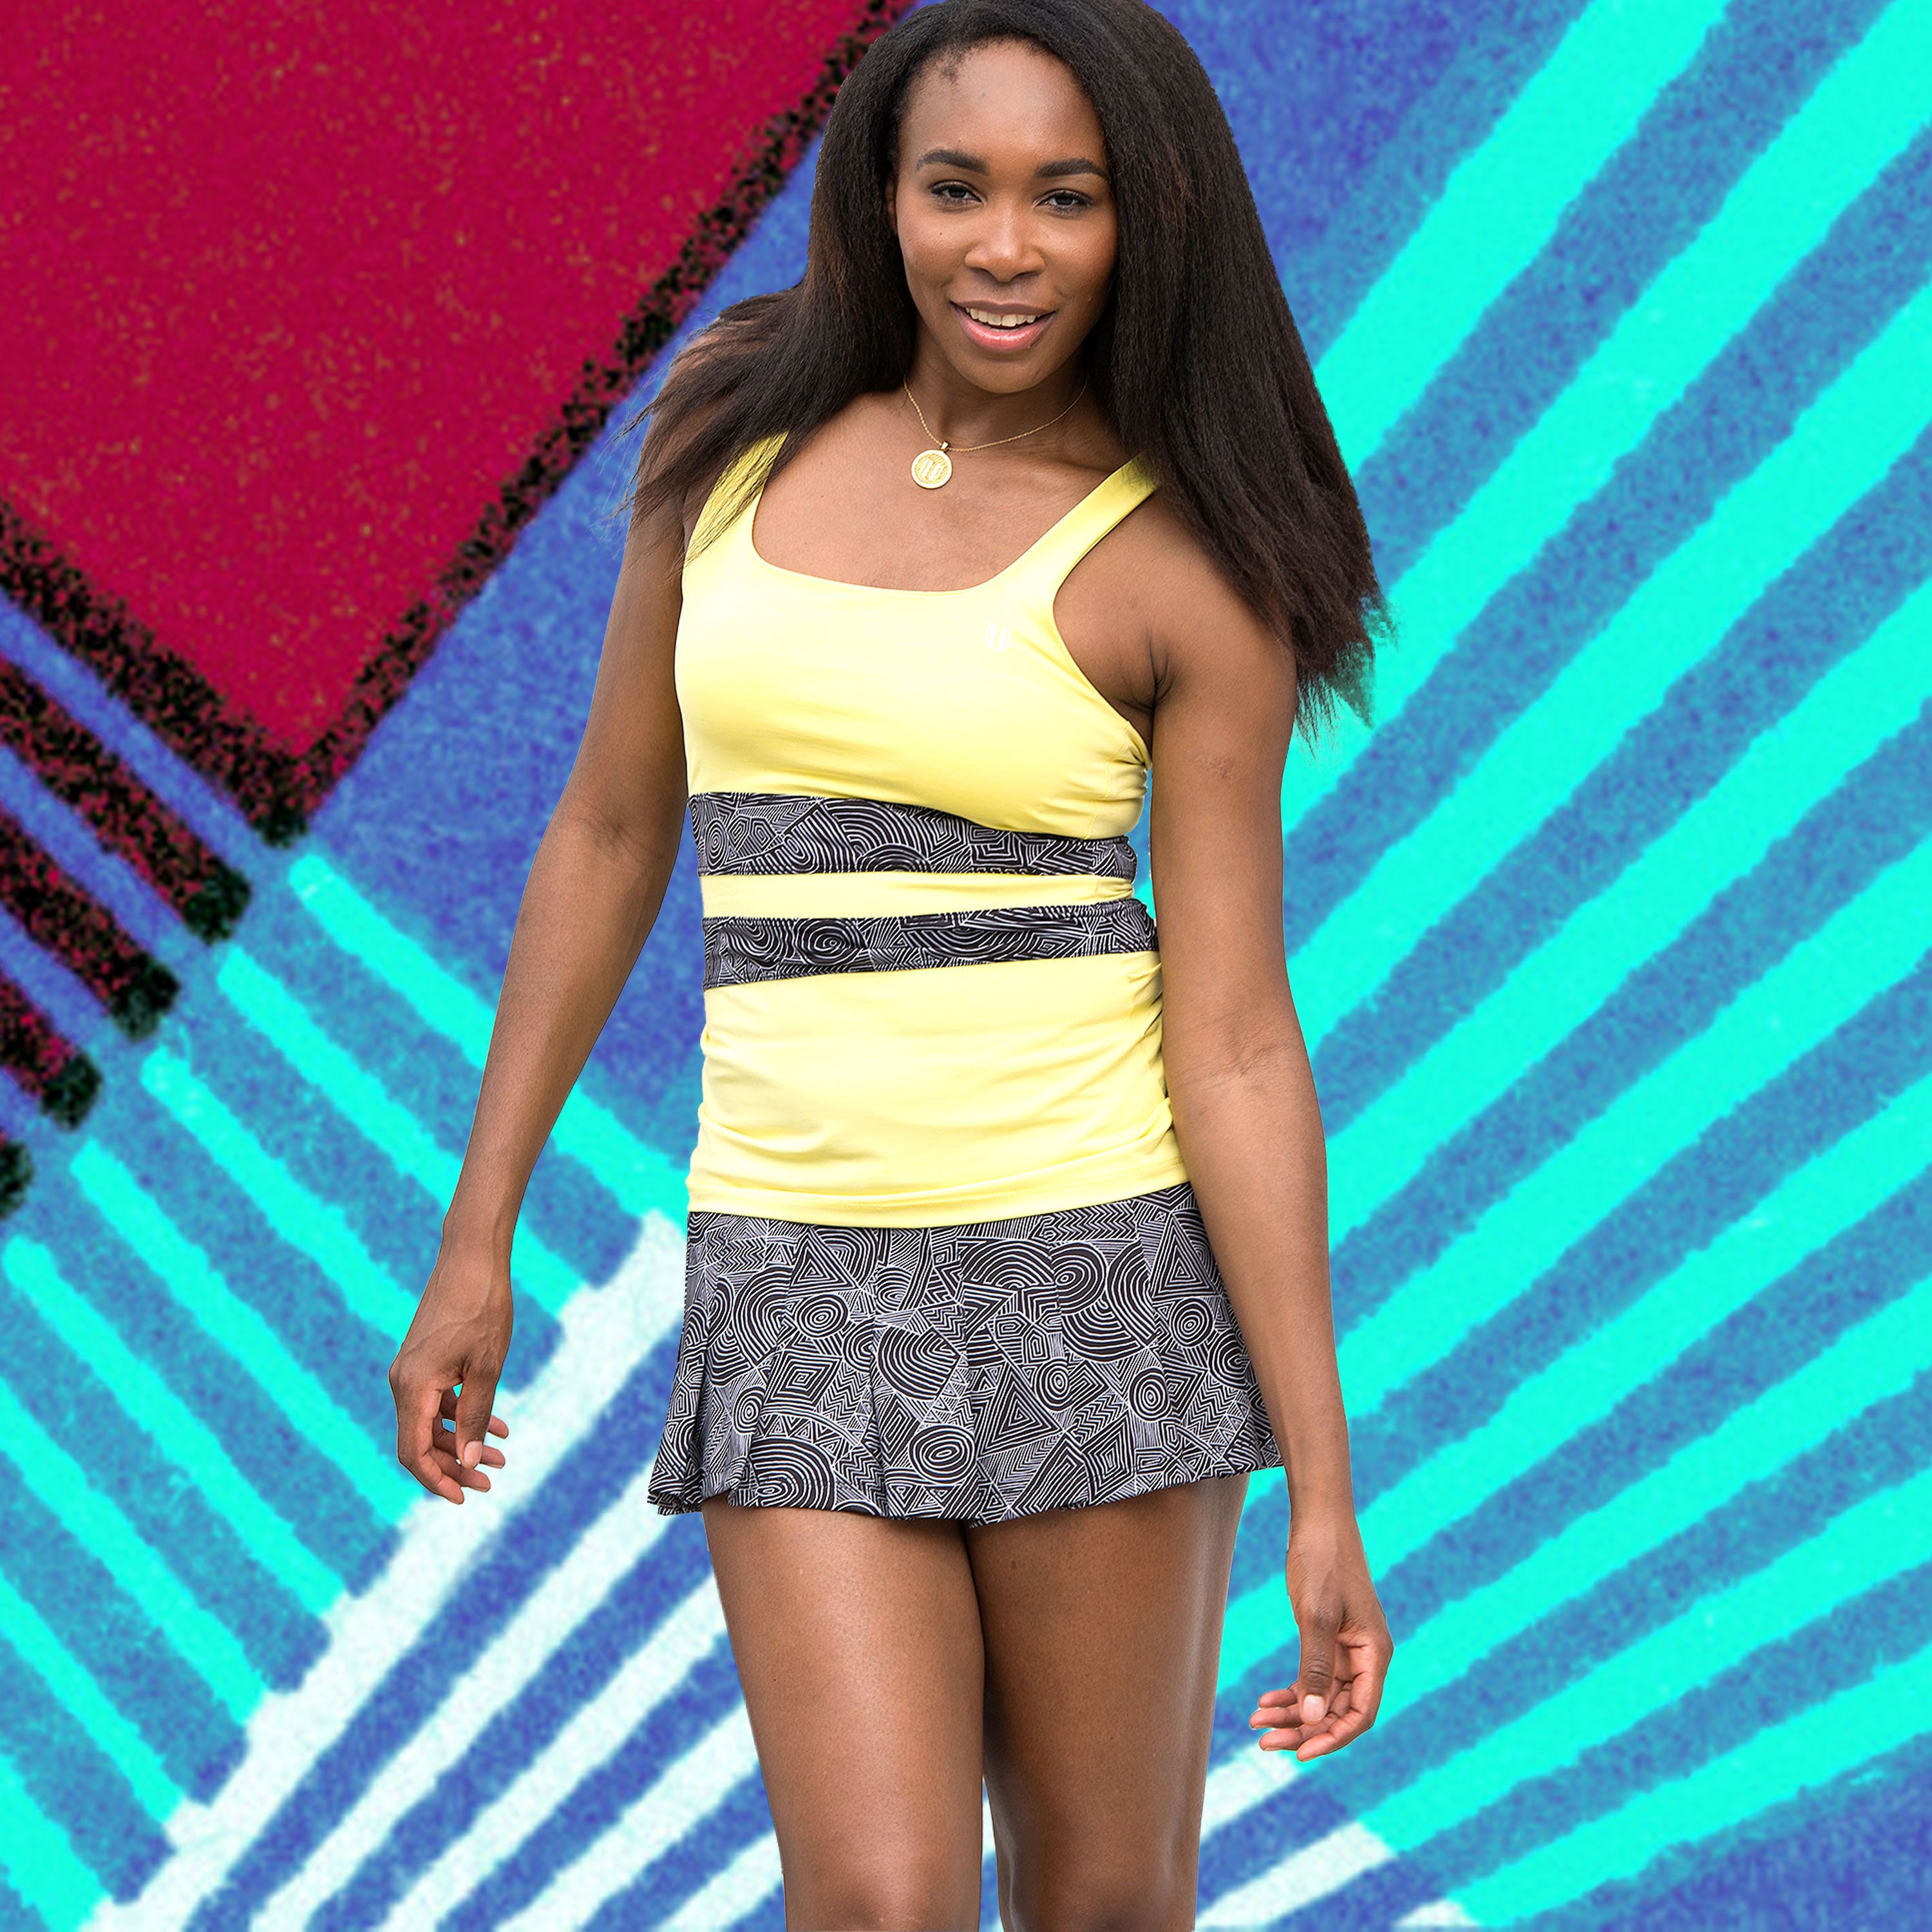 Venus Williams Describes Her Workout Routine and Eating Habits: 'It's My Job to Be Healthy'
